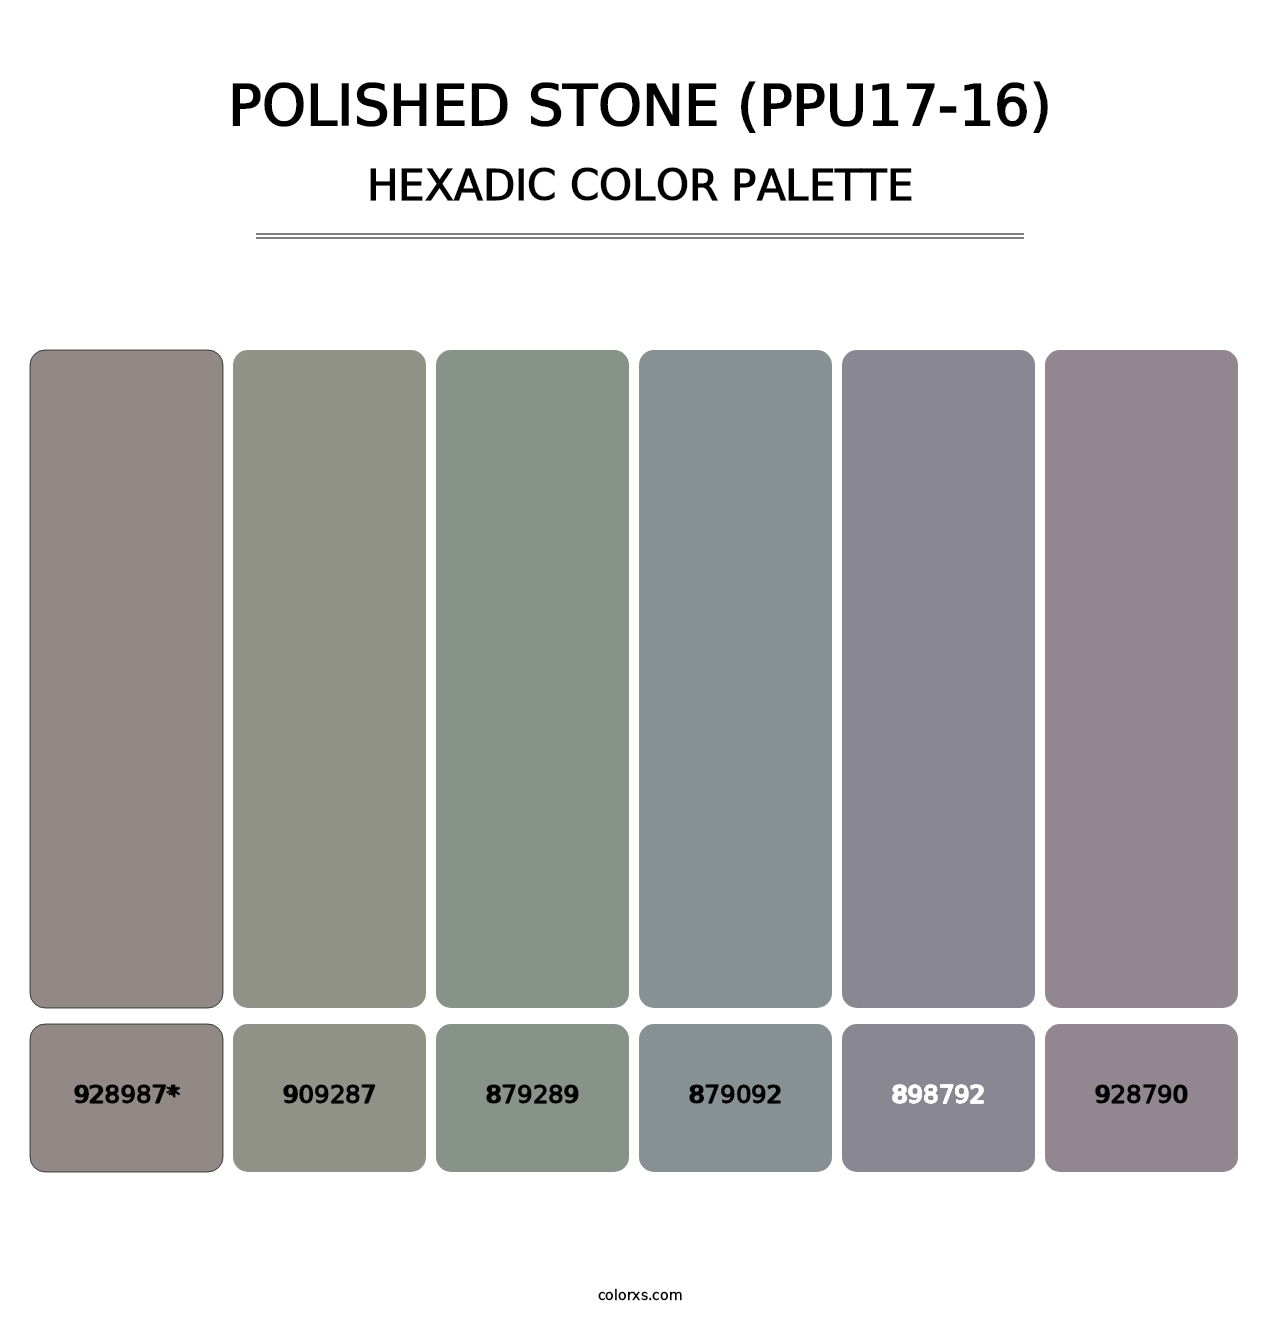 Polished Stone (PPU17-16) - Hexadic Color Palette